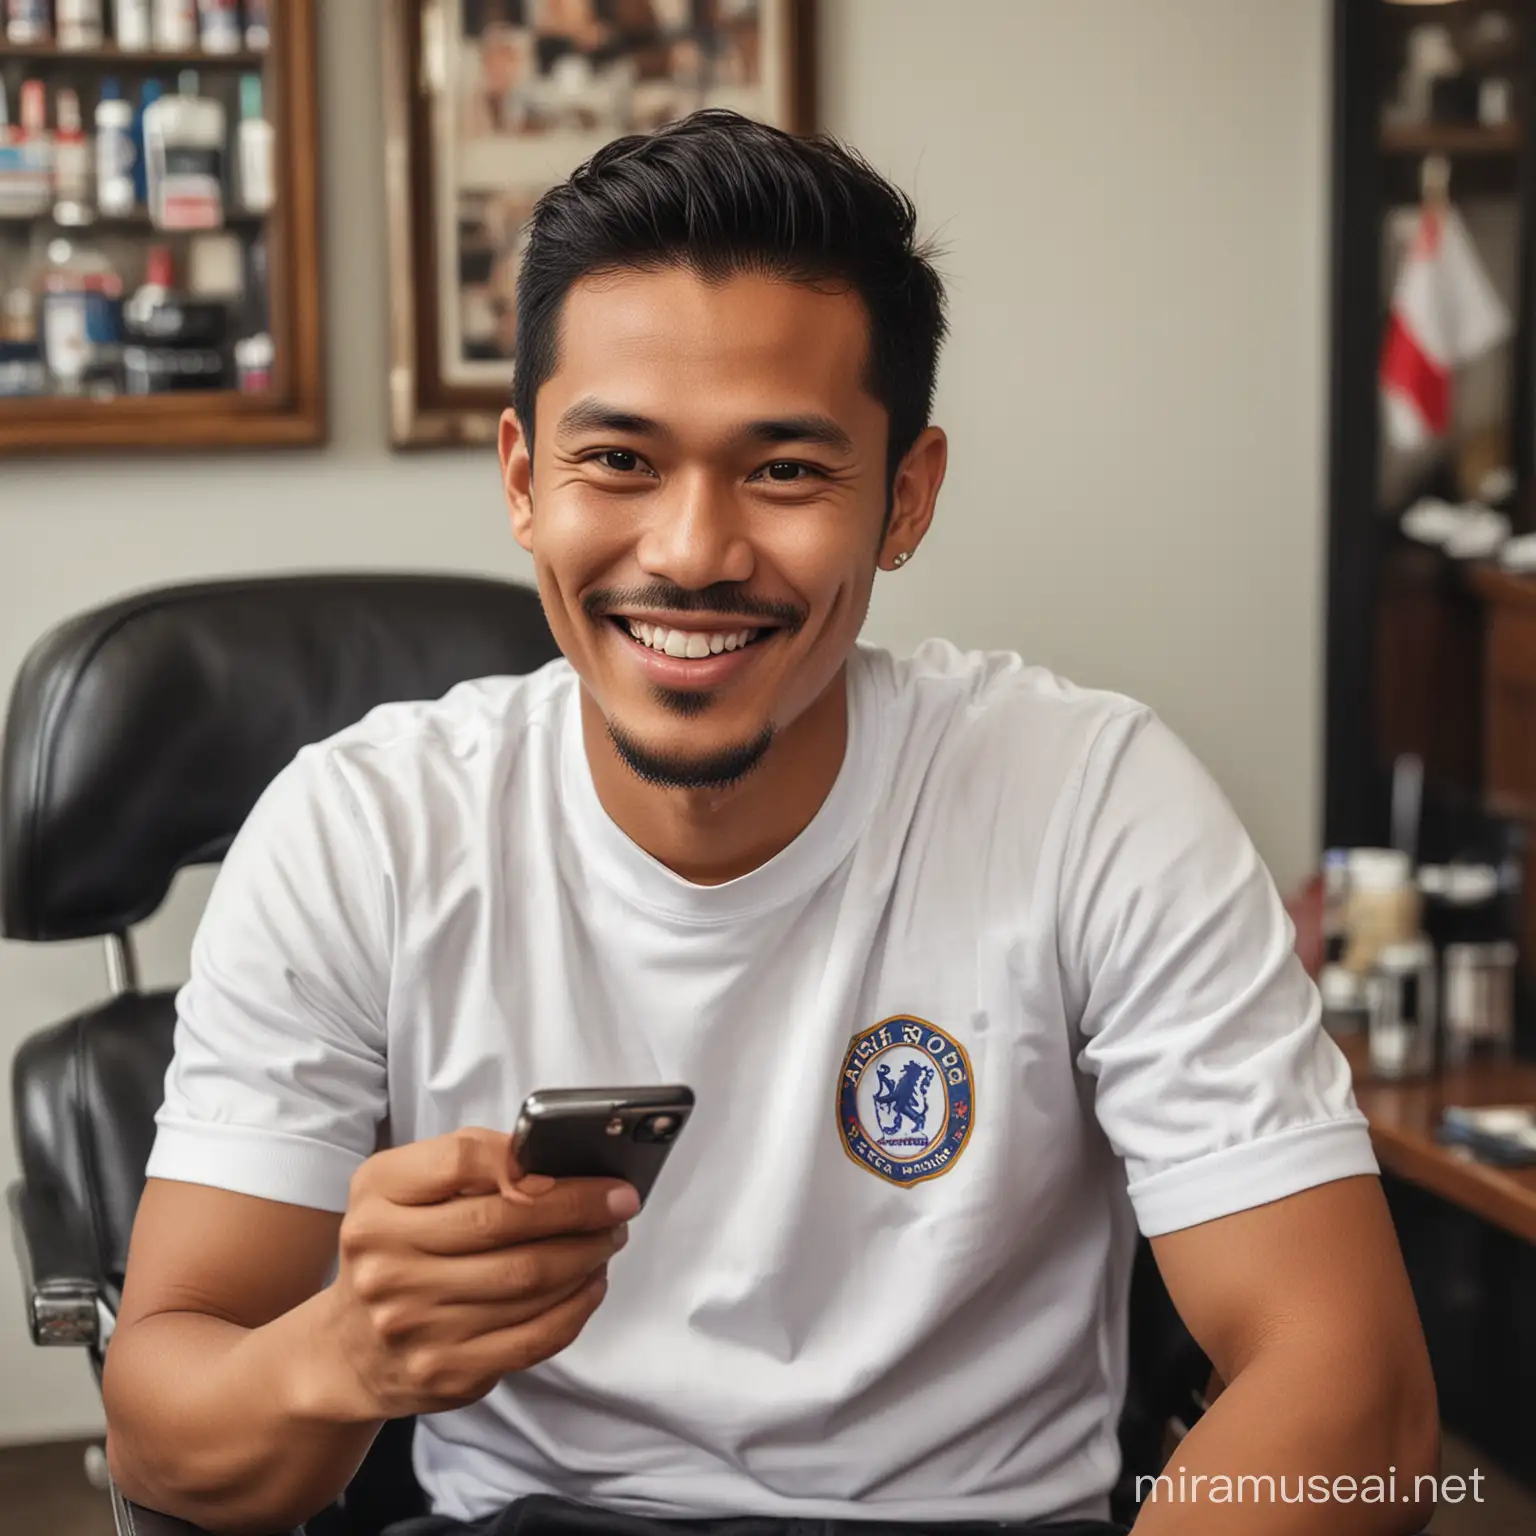 a handsome Indonesian man aged 35 years was sitting pensively in a barbershop chair while holding a cellphone with smiling lips wearing a white Chelsea football shirt.  The atmosphere in the barbershop room was very calm.  Taken by a DSLR camera.